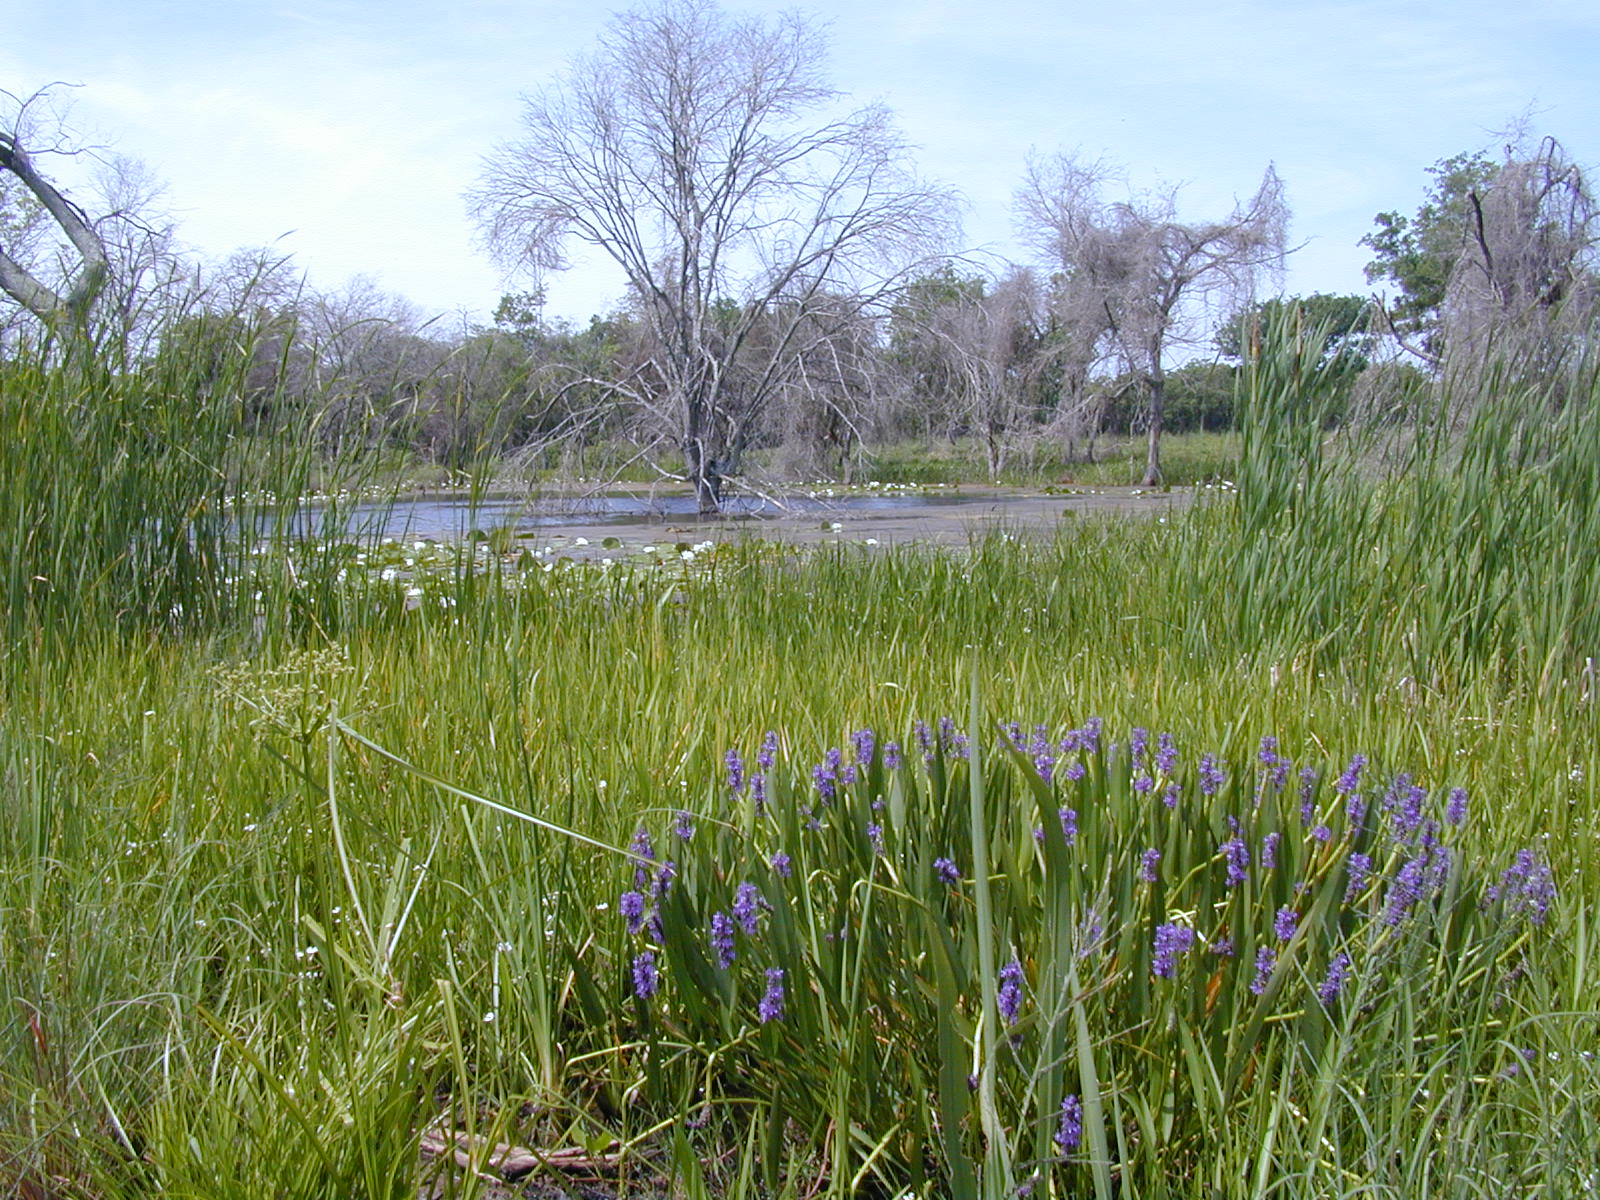 purple pickerel weed in the foreground of a pond lined with wetland vegetation